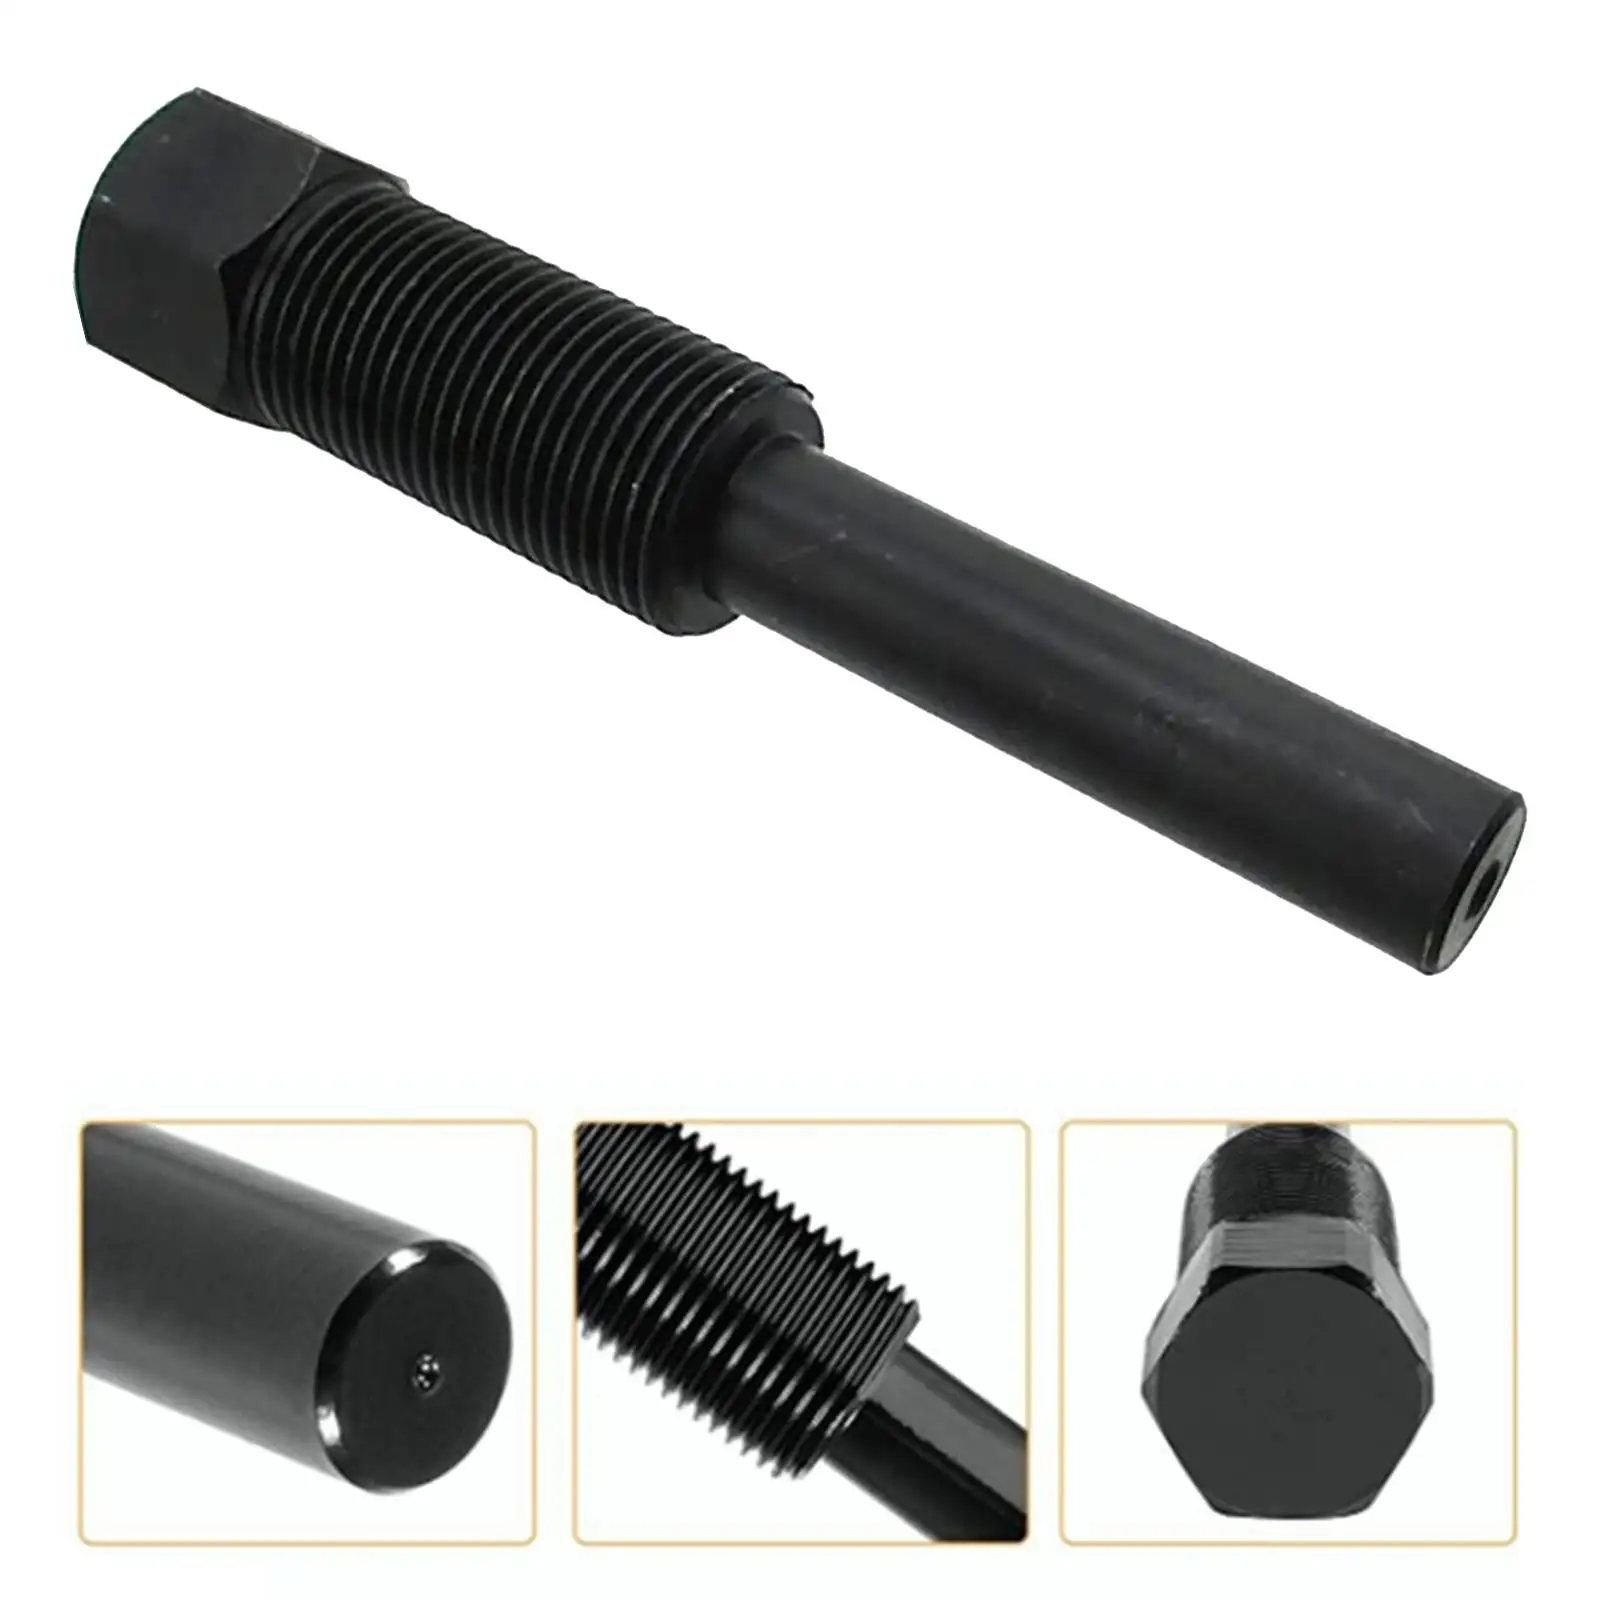 Secondary Drive Clutch Puller Remover Tool 2870903 Black Accessories Simple to Use Durable PP3077 for Polaris ATV 1985-2009